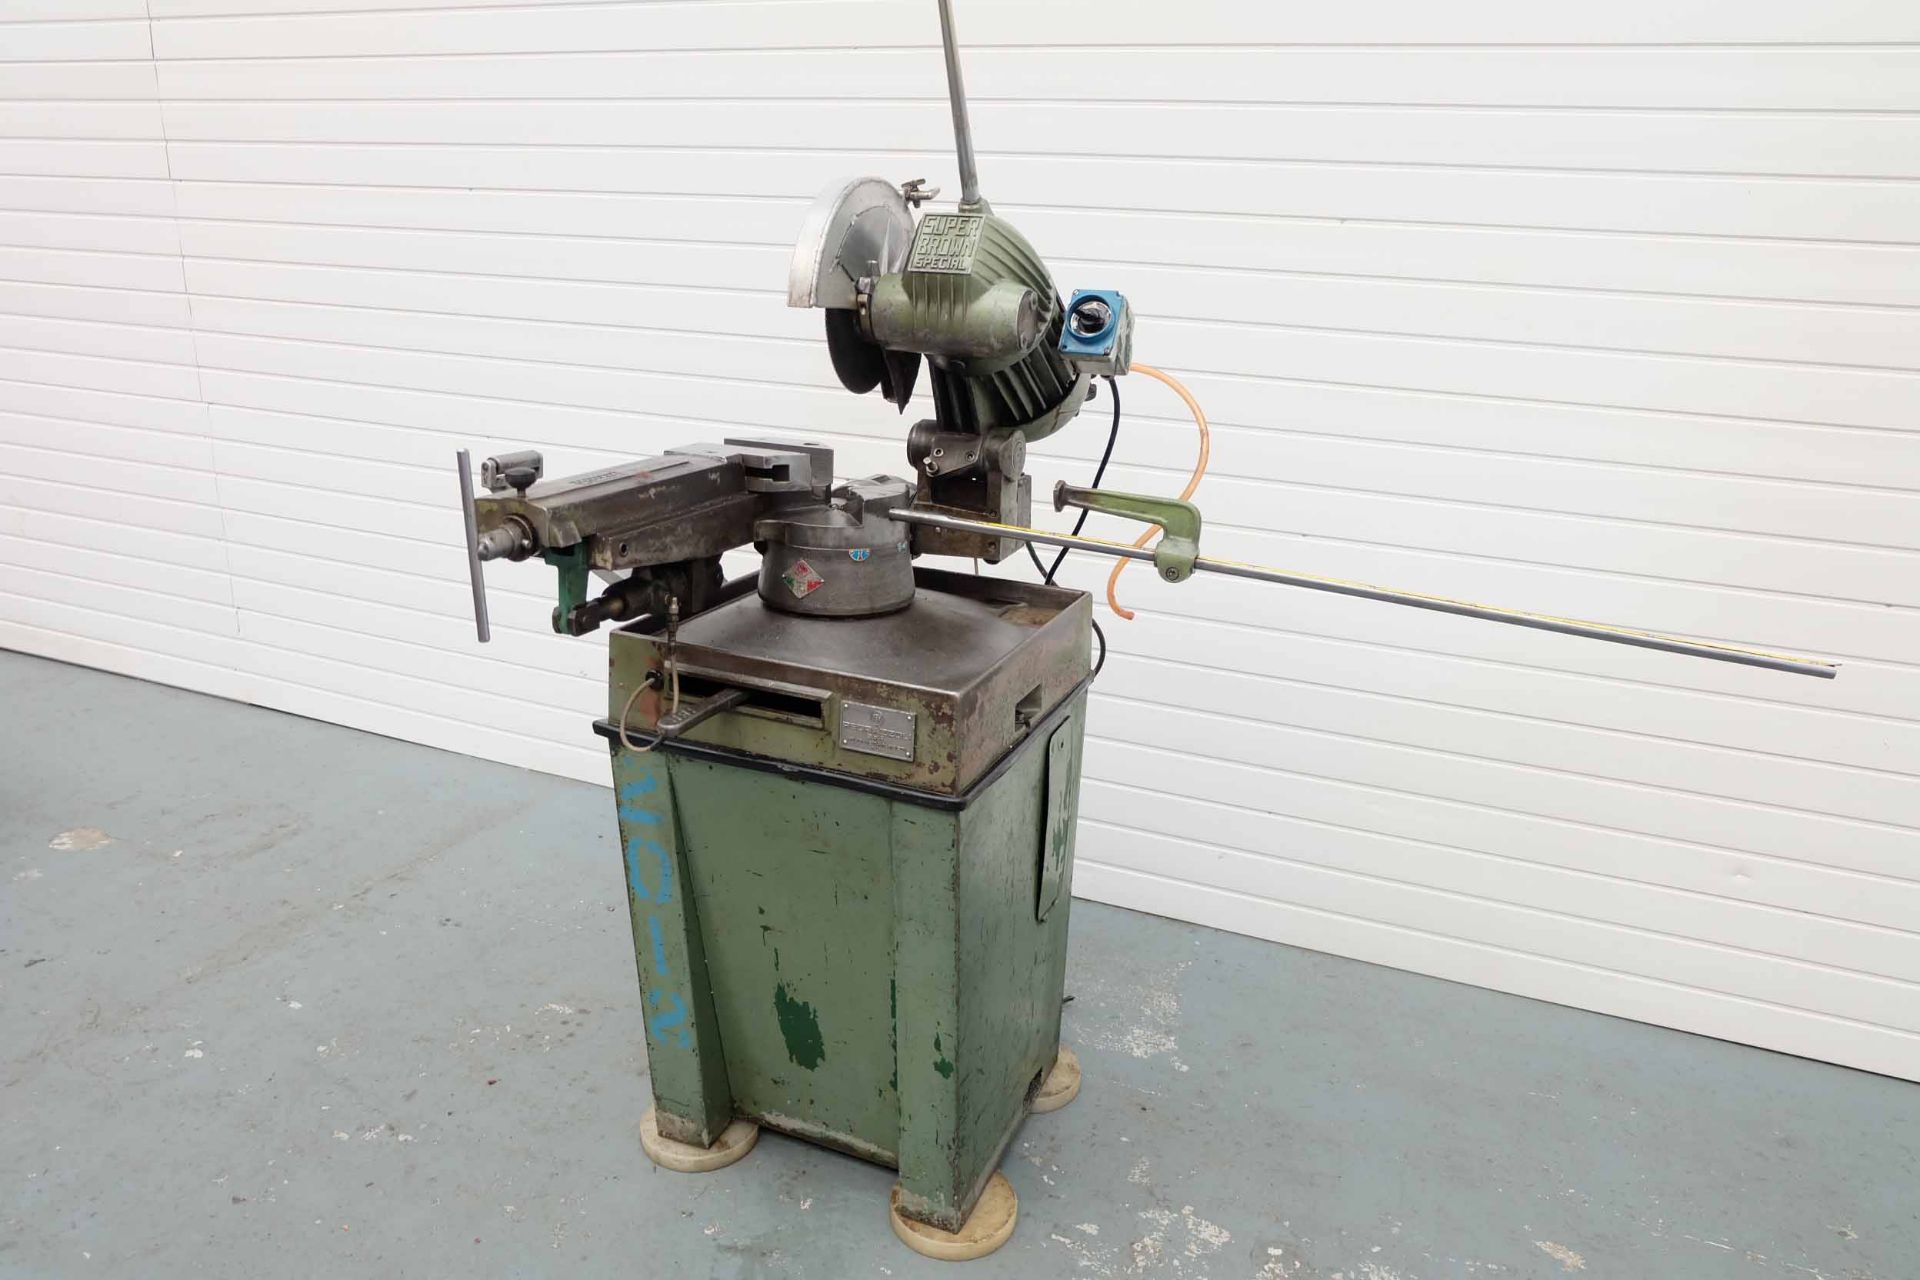 Pedrazzoli Super Brown Special Pull Down Chop Saw. Max Blade Size 315mm. 45 Degree Swivel Both Ways - Image 2 of 10